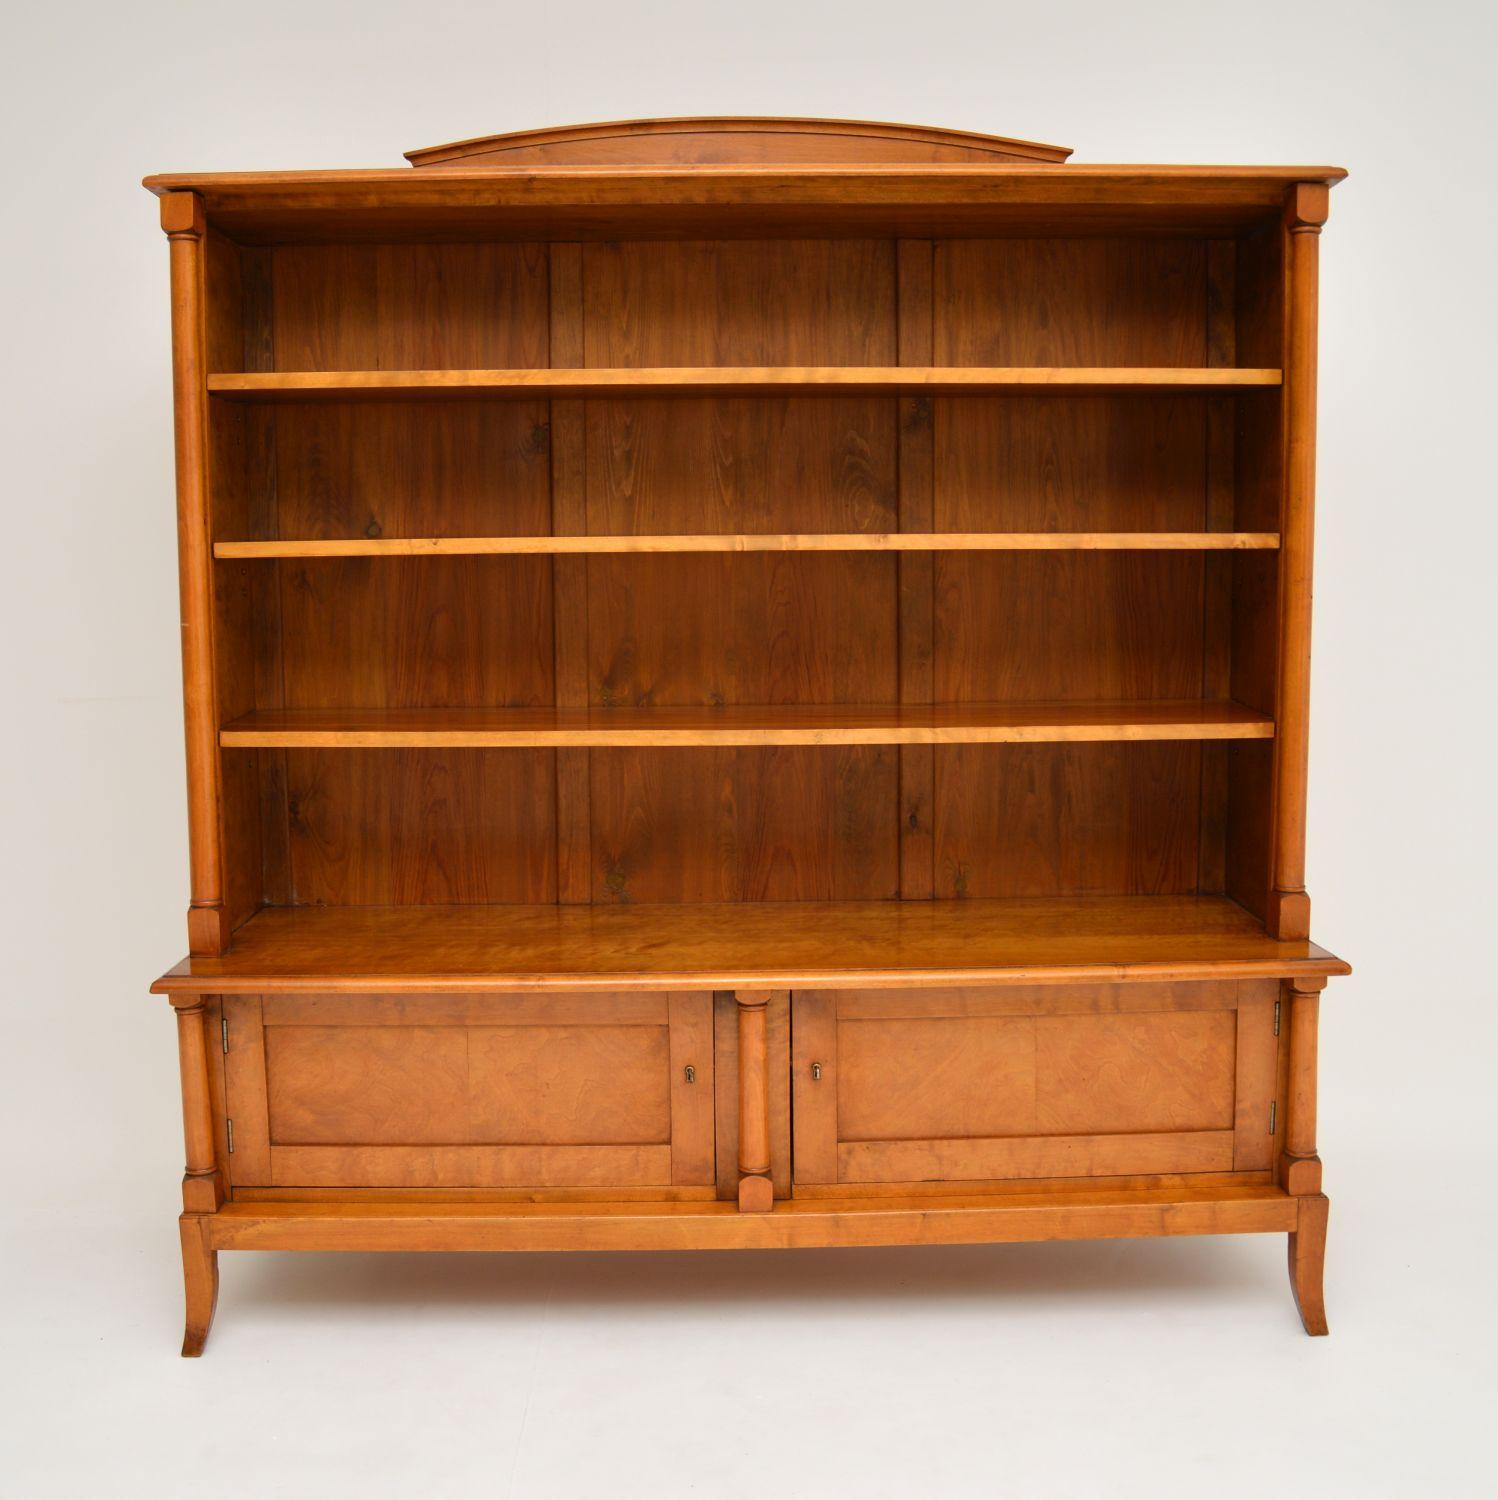 A fantastic antique bookcase in solid satin birch, this was made in Sweden and dates from around the 1860-80 period. It is in the typical Swedish Biedermeier style.

This is of amazing quality, very well built and heavy. There are three adjustable